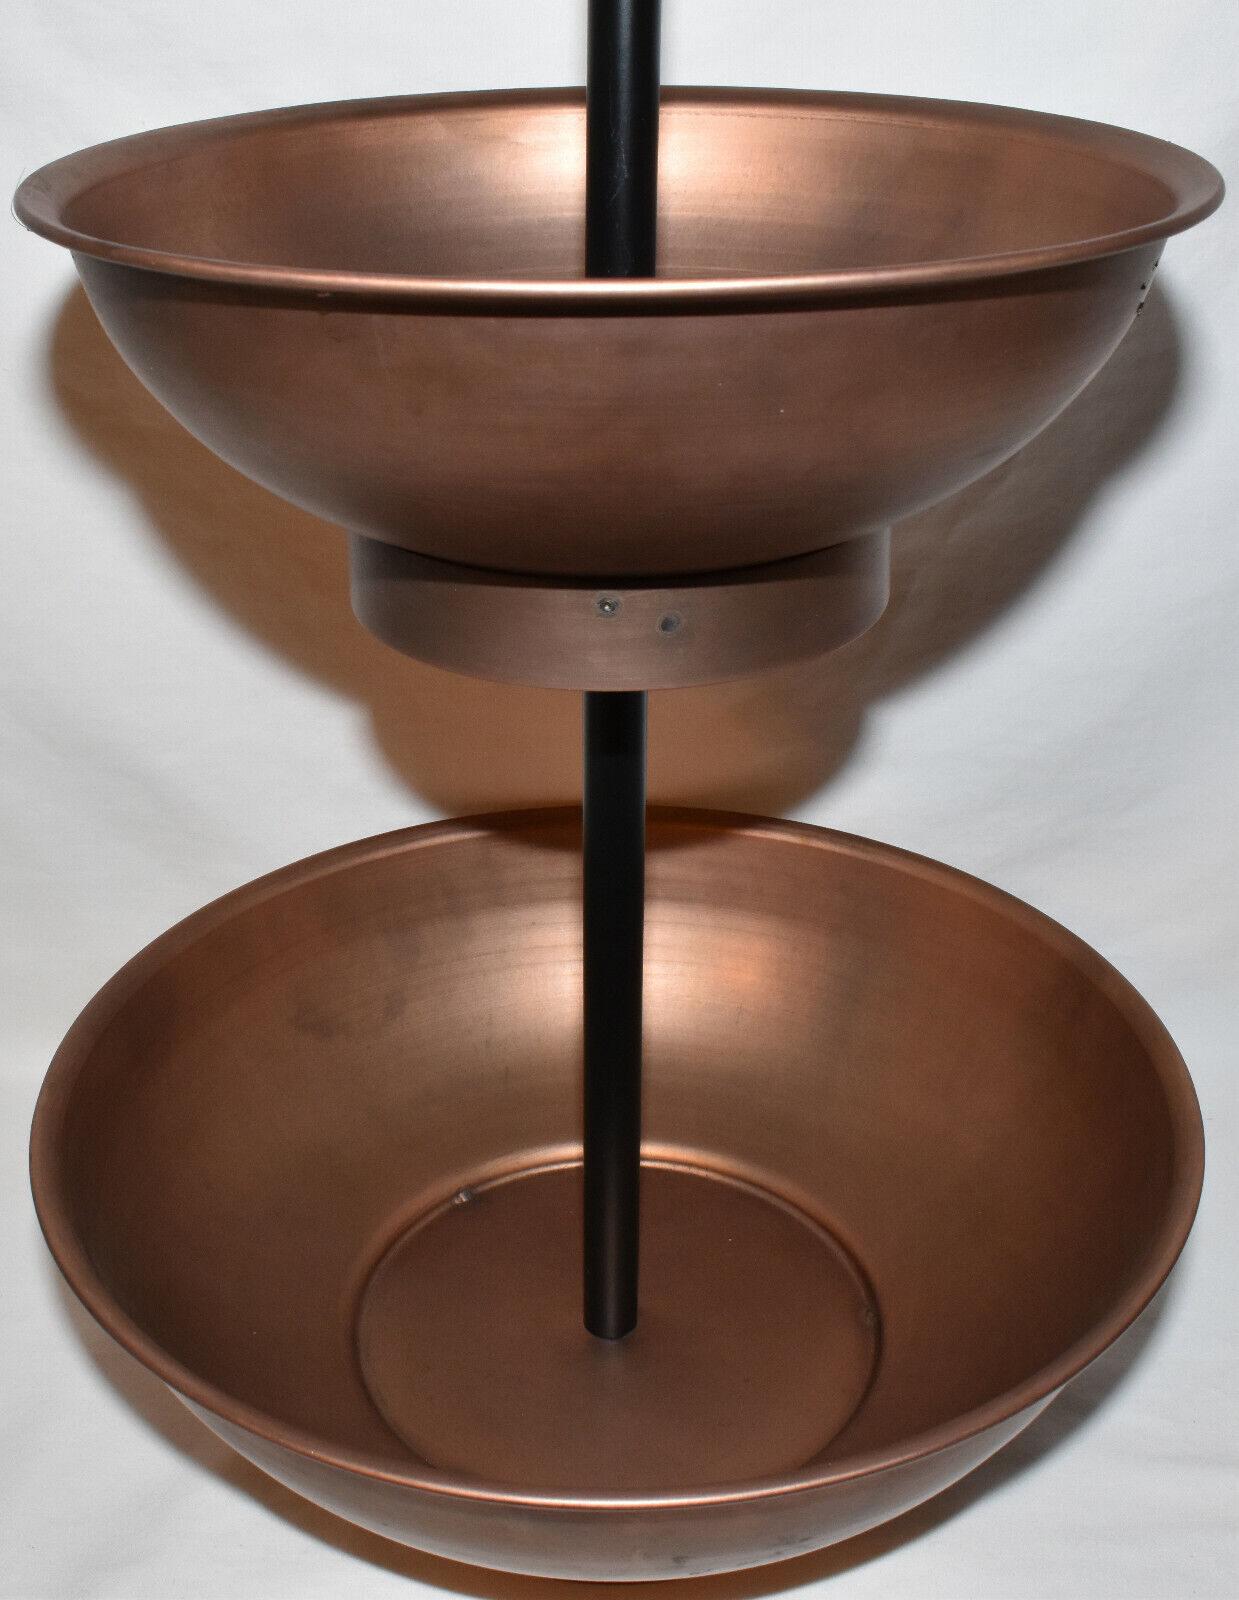 Two Tier Copper Tray Bowl 21" Table Stand Centerpiece Vintage Inspired Decor New